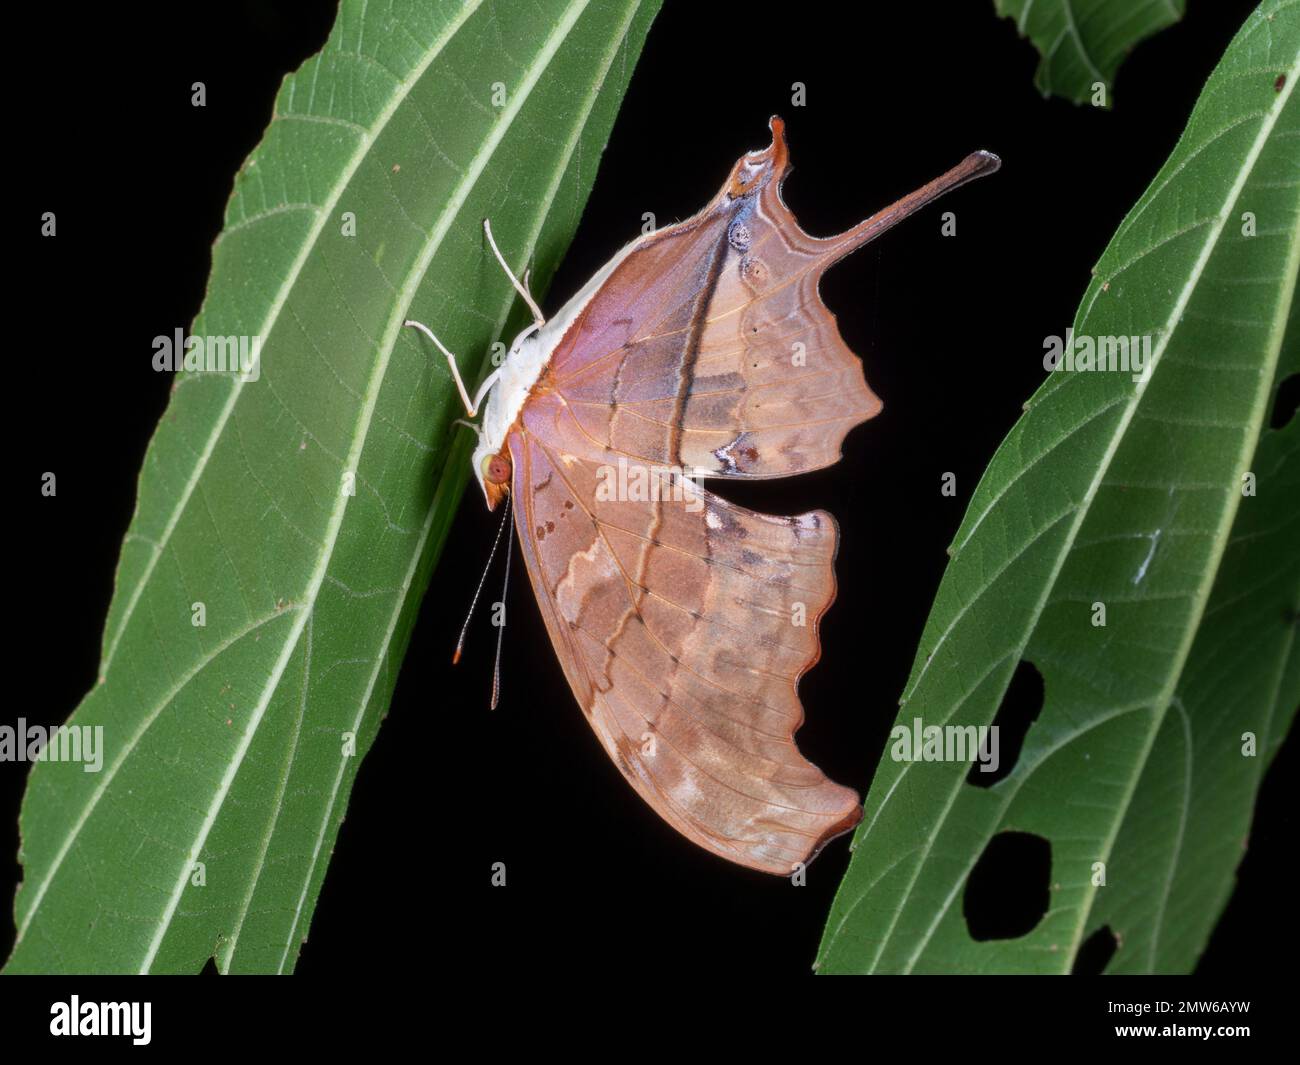 A page butterfly (Nymphalidae) roosting upside down at night in the rainforest, Ortellana province, Ecuador Stock Photo